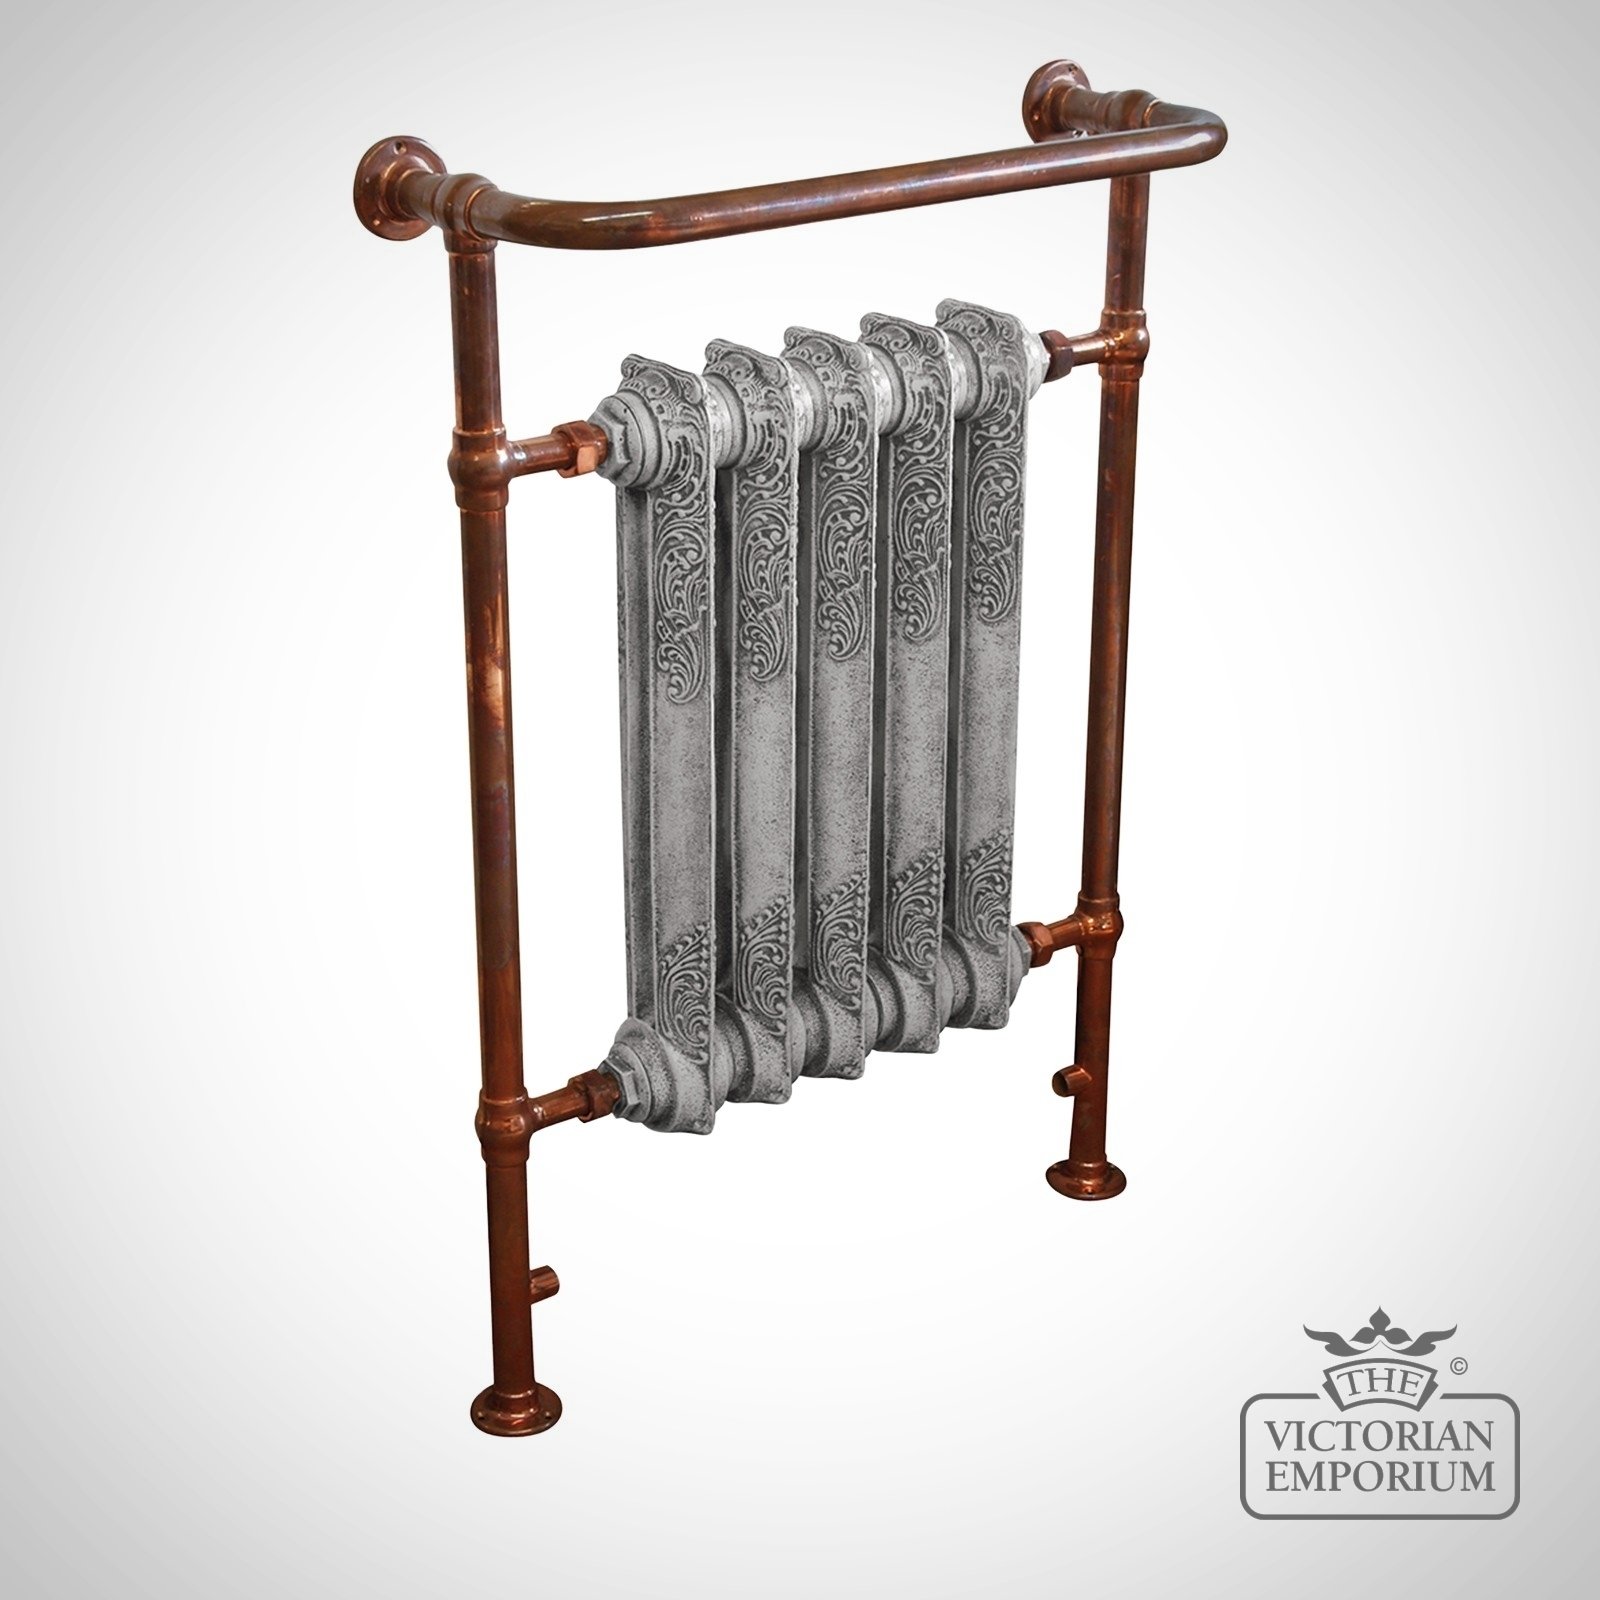 Willford Heated Towel Rail 960x675mm In A Chrome Or Copper Finish With Ornate Centre Section